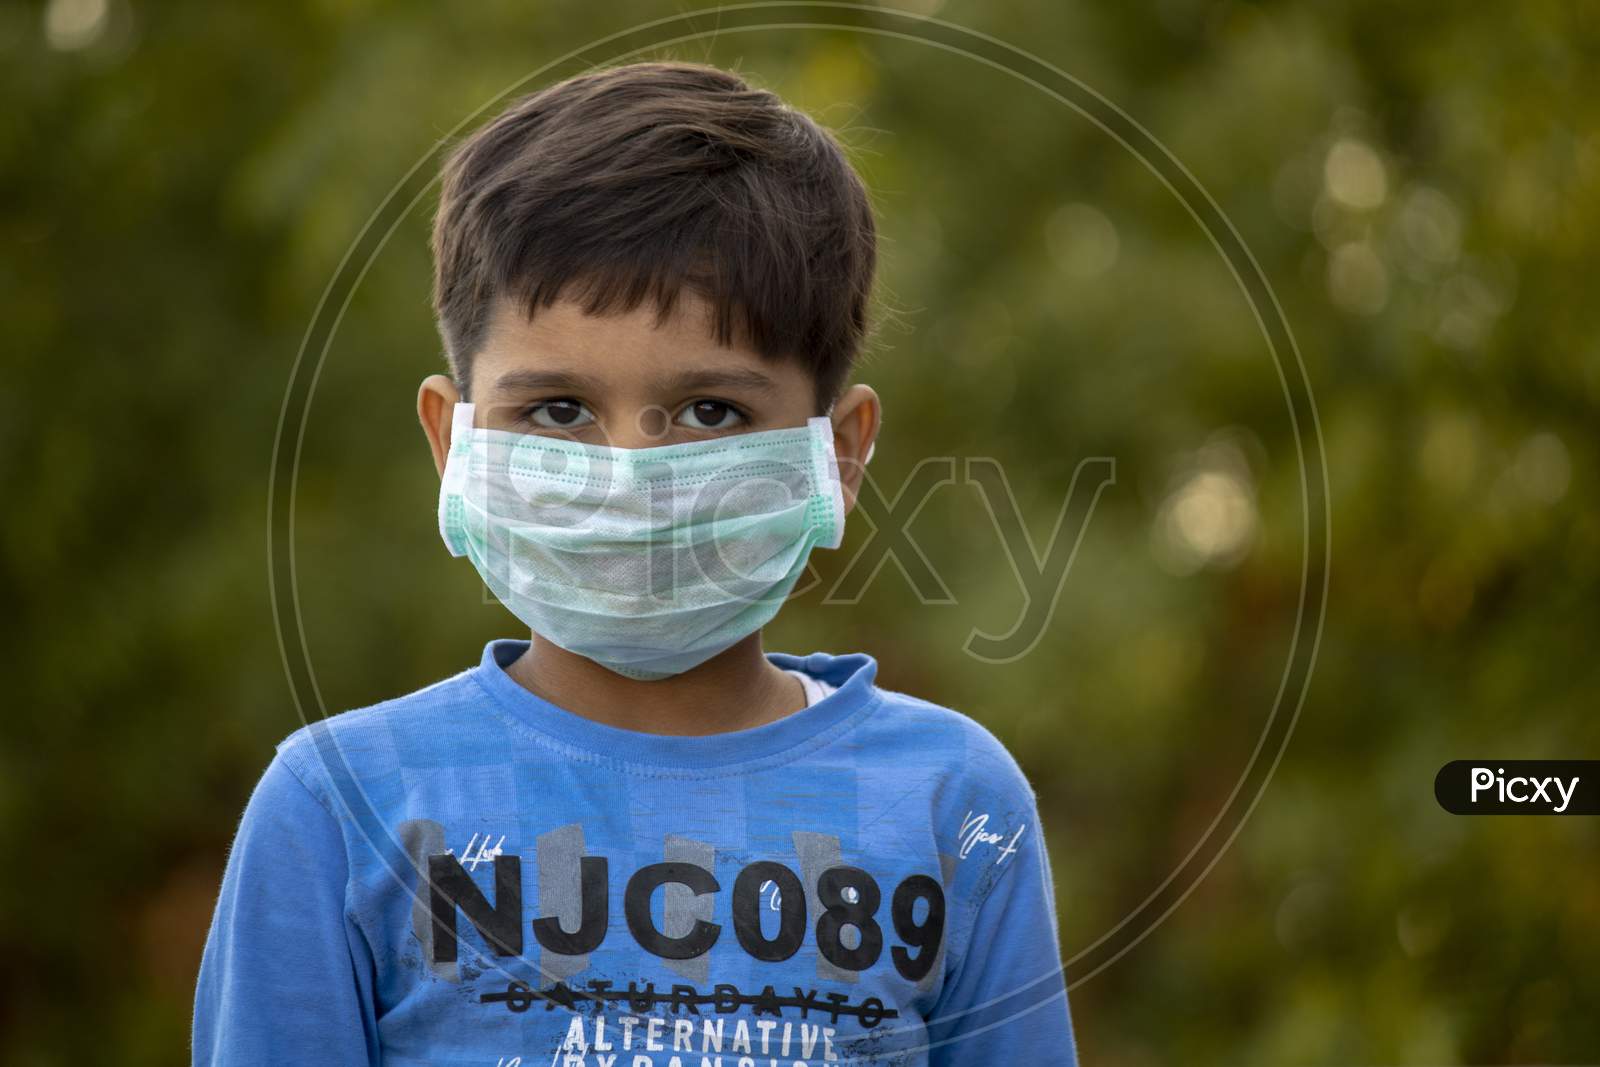 Indian Child With Mask On His Mouth For Protection From Corona Virus